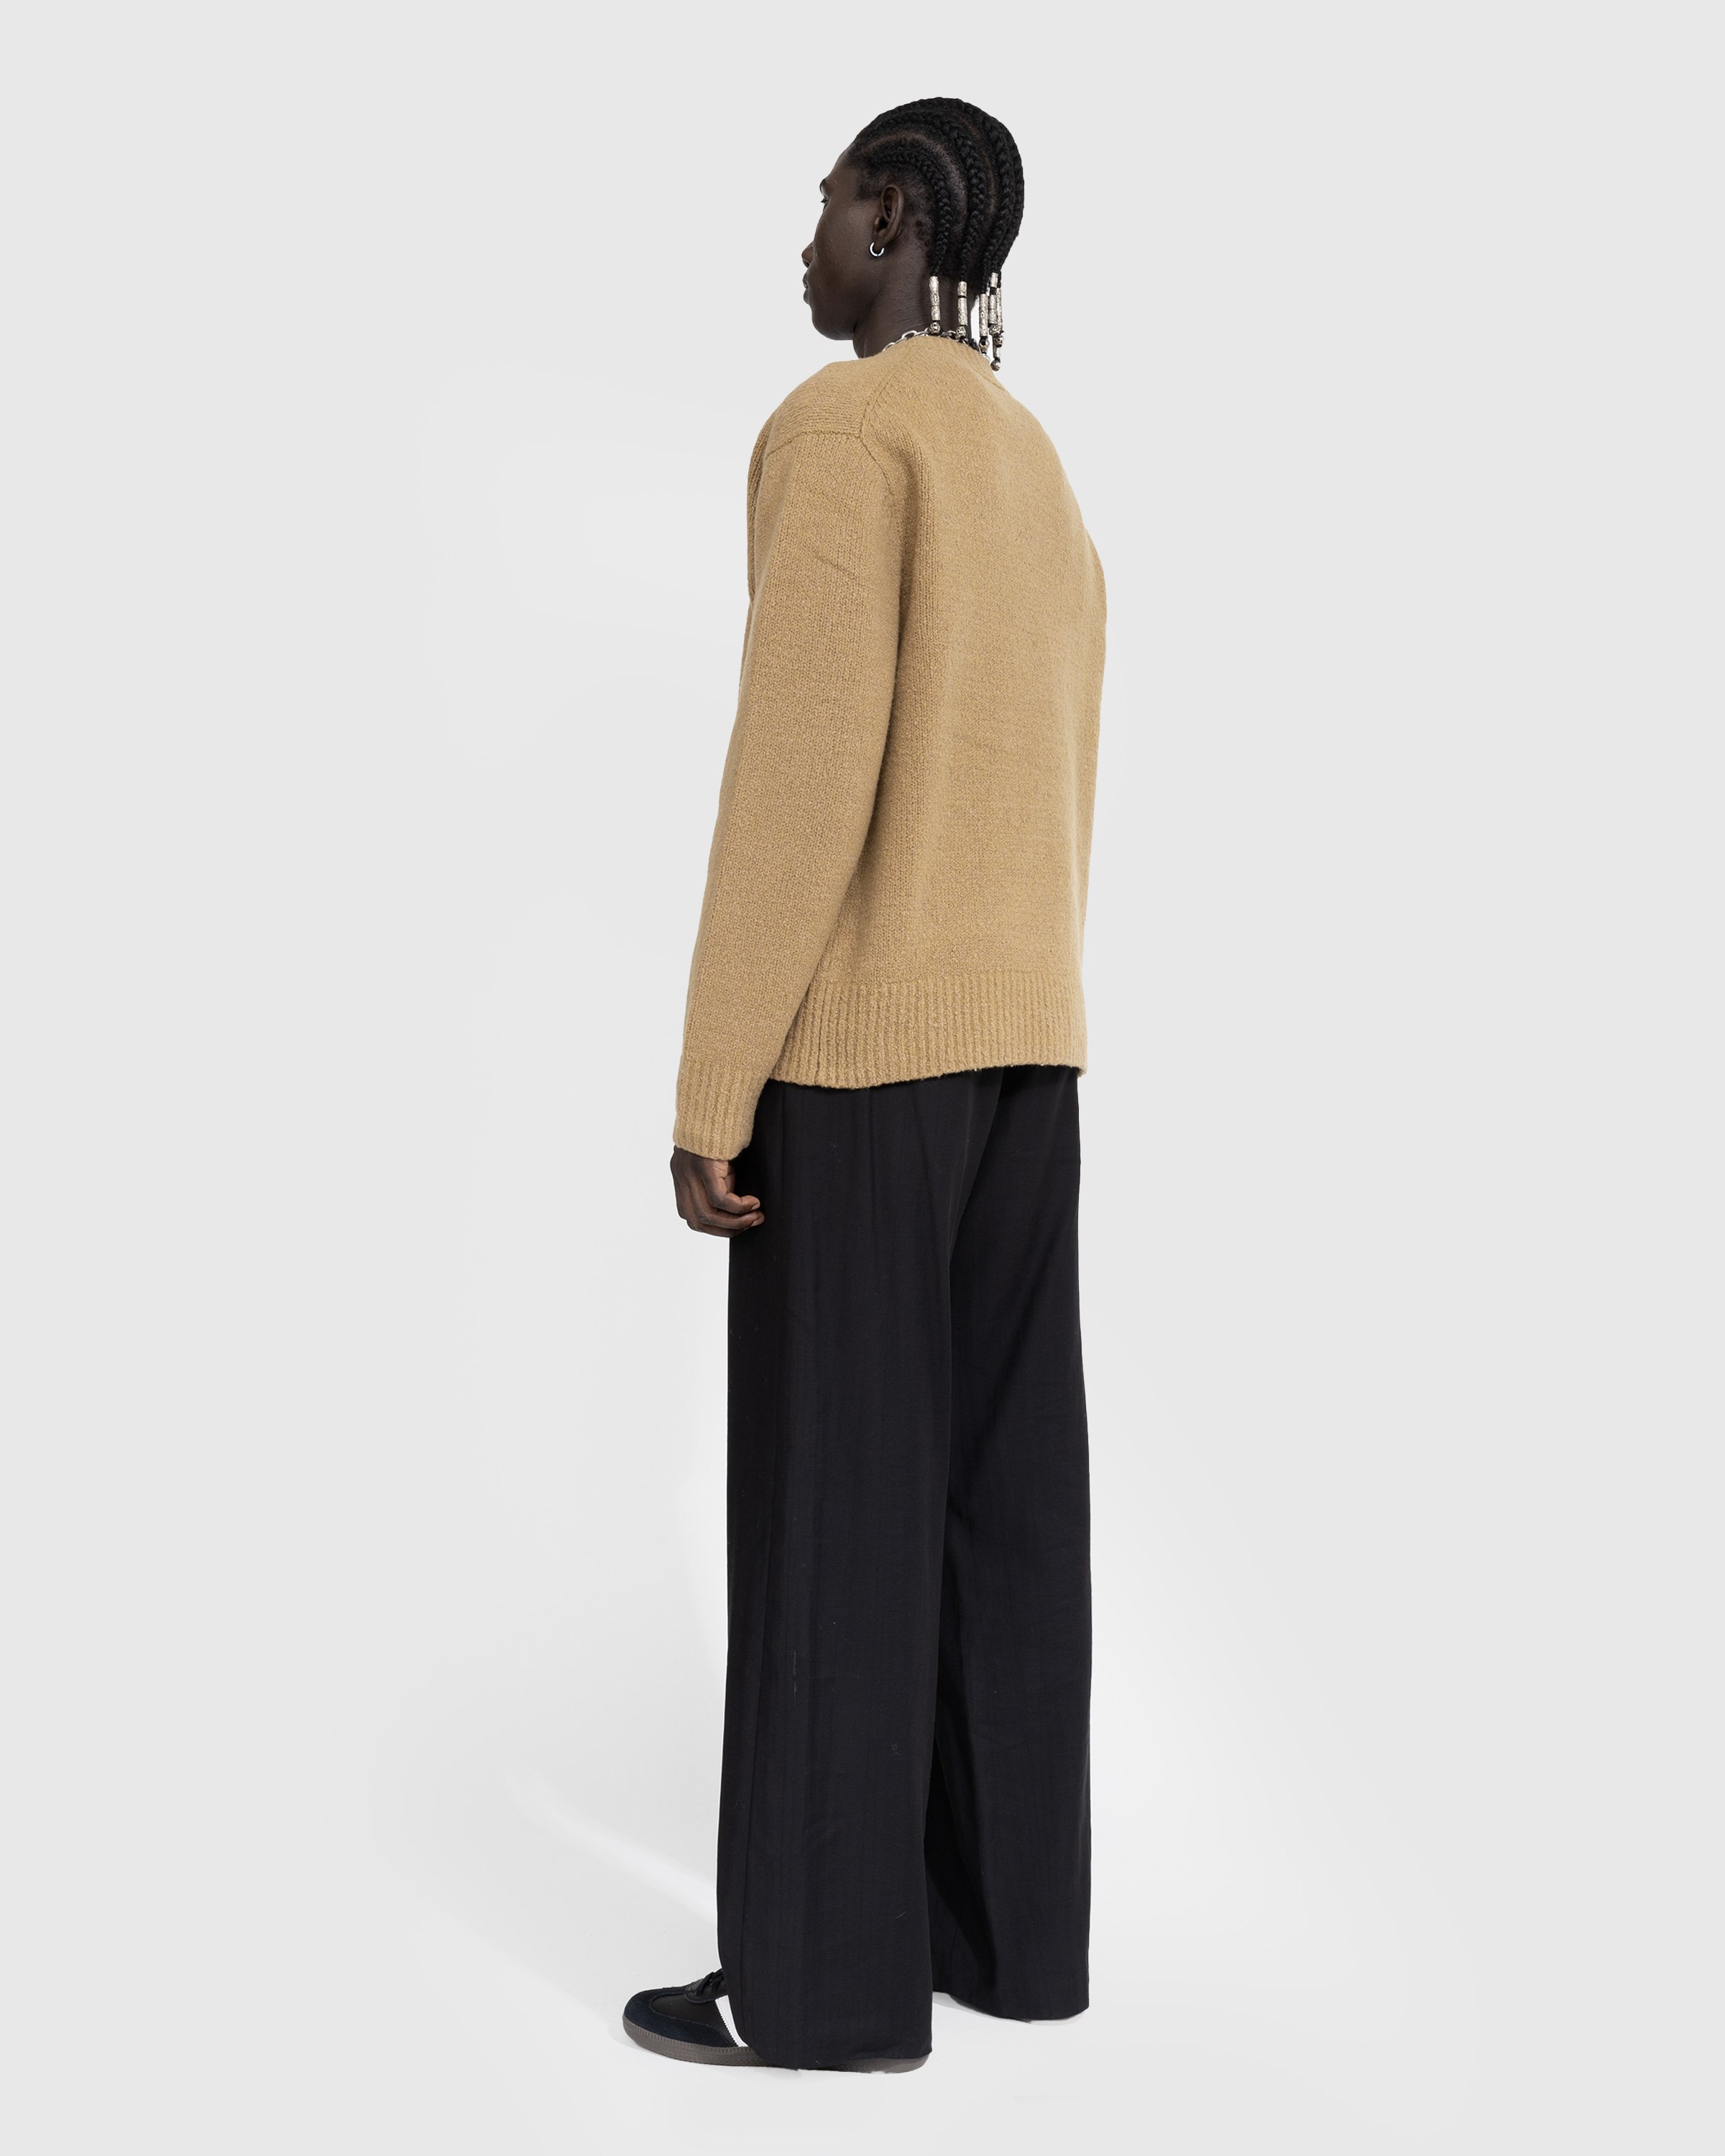 Acne Studios - FN-MN-KNIT000441 - Clothing - Brown - Image 4